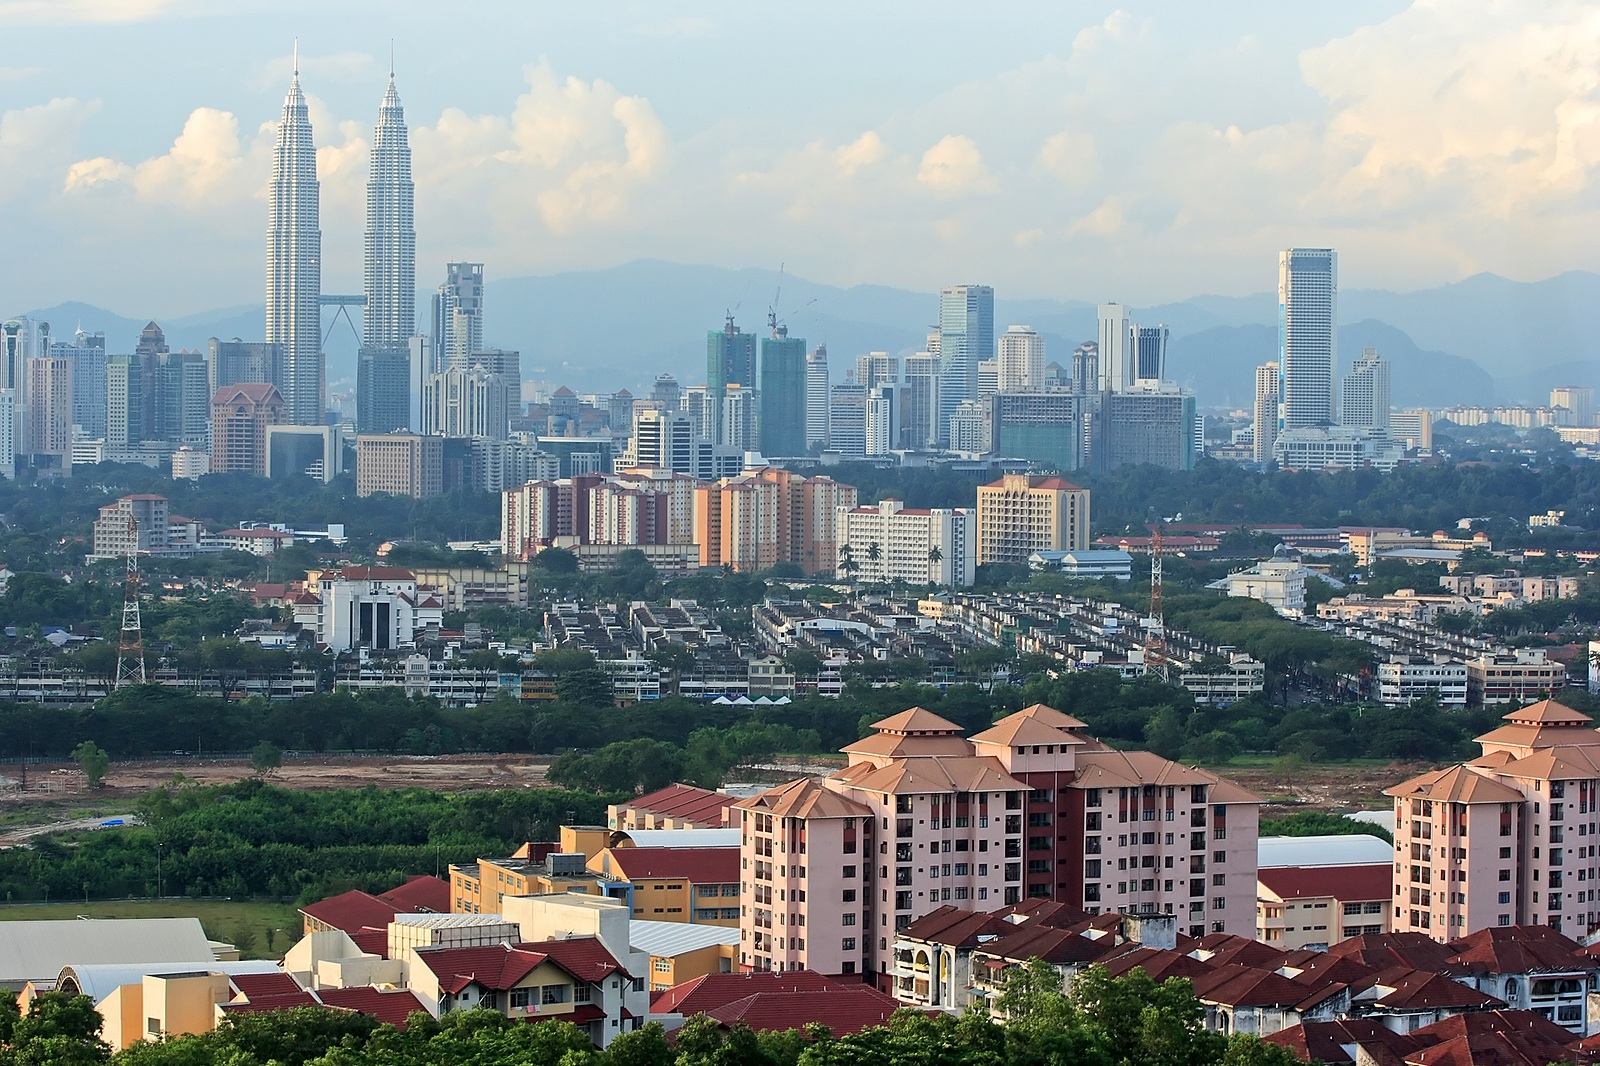 Malaysia: Highlights from 40 Years of Travel There